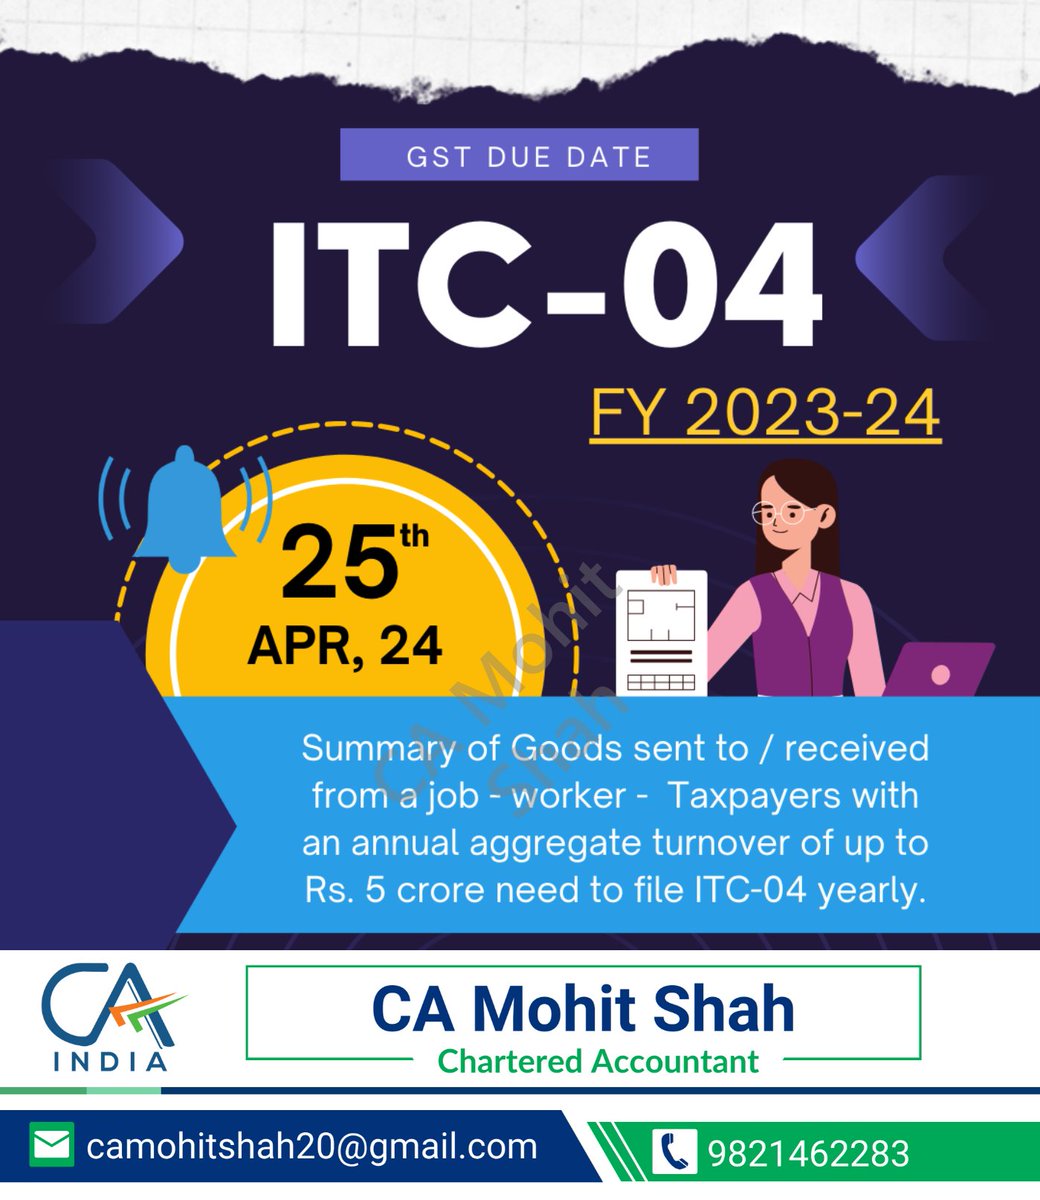 Taxpayers with turnover upto Rs. 5 crore, 25th April,2024 is the last date to file ITC-04 for FY 2023-24. Ensure timely filing to avoid Late Fees.    

#ITC04 #InputTaxCredit #GSTCompliance #GSTFiling #GSTIndia #TaxCompliance #GSTReturns #InventoryManagement #TaxReconciliation